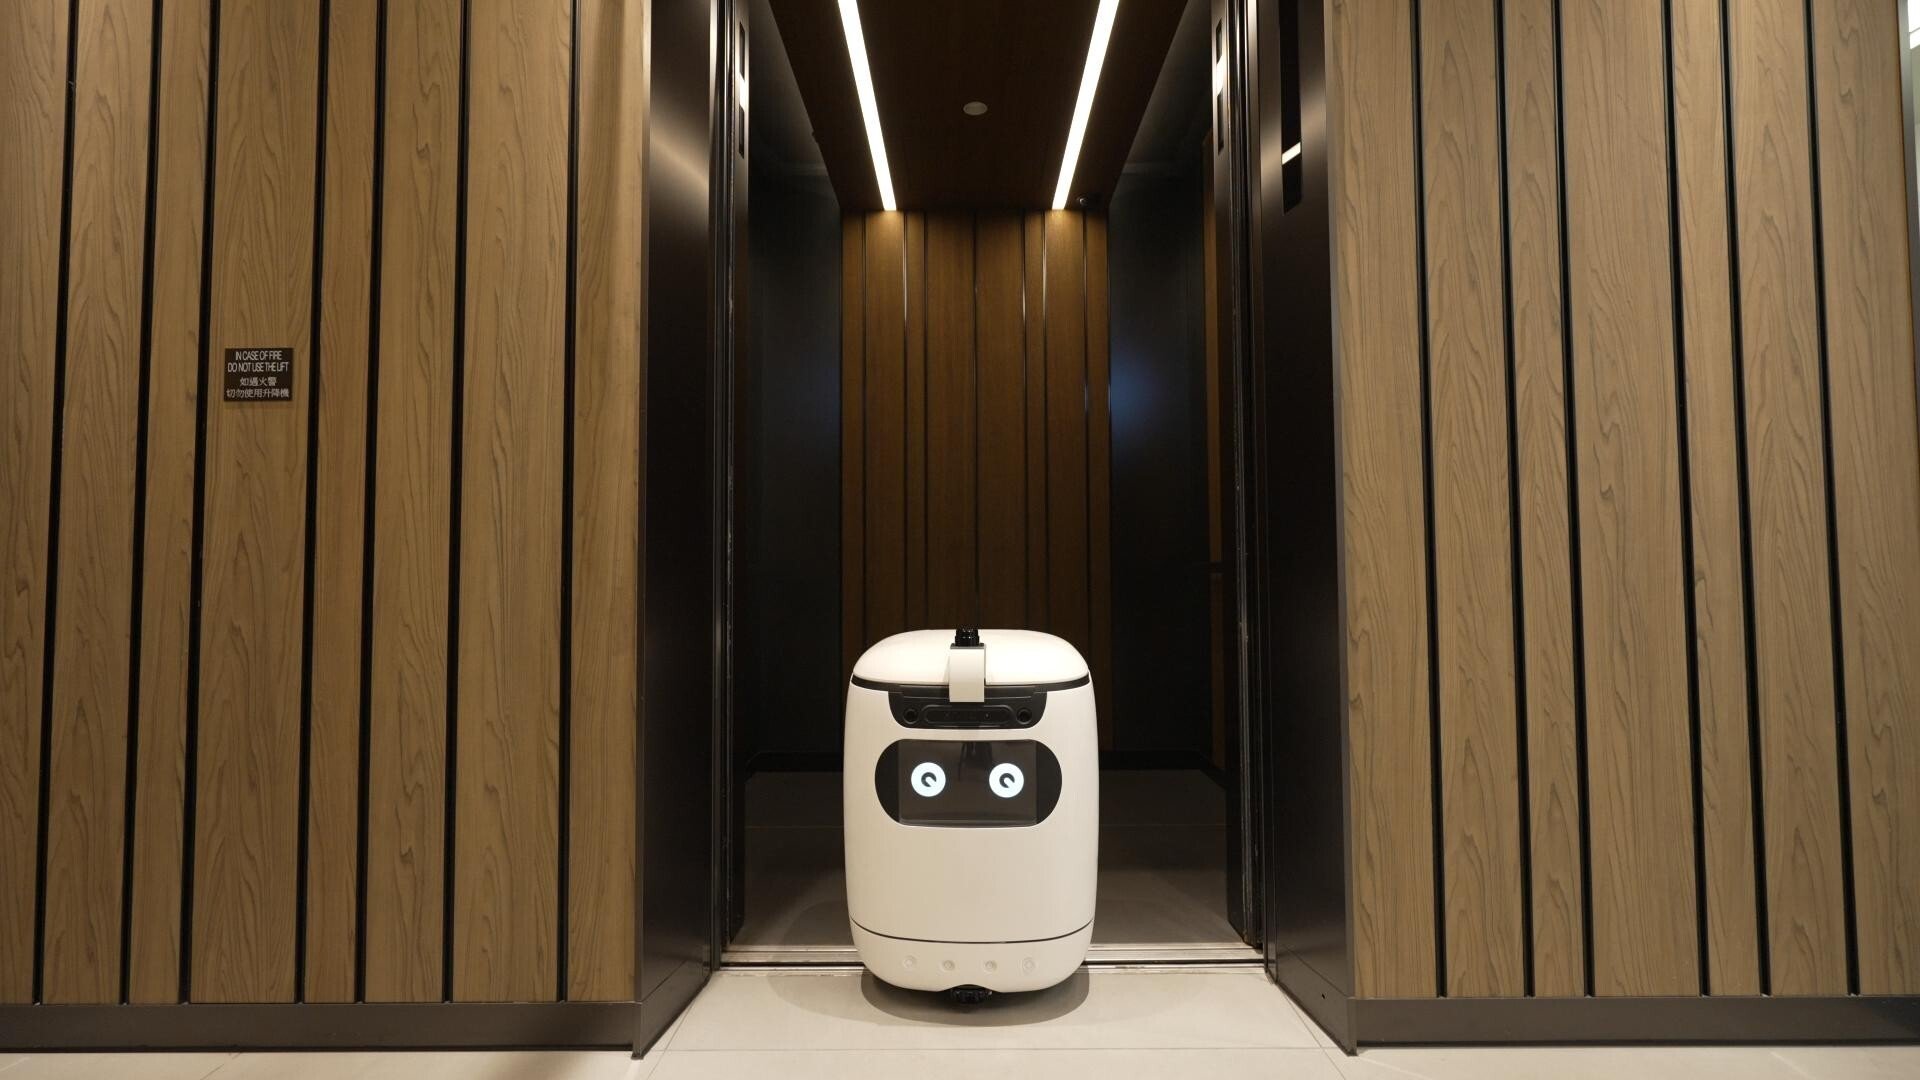 The Rice delivery robots can travel on elevators to deliver meals in quarantine hotels, allowing companies to protect their employees while providing necessary services.